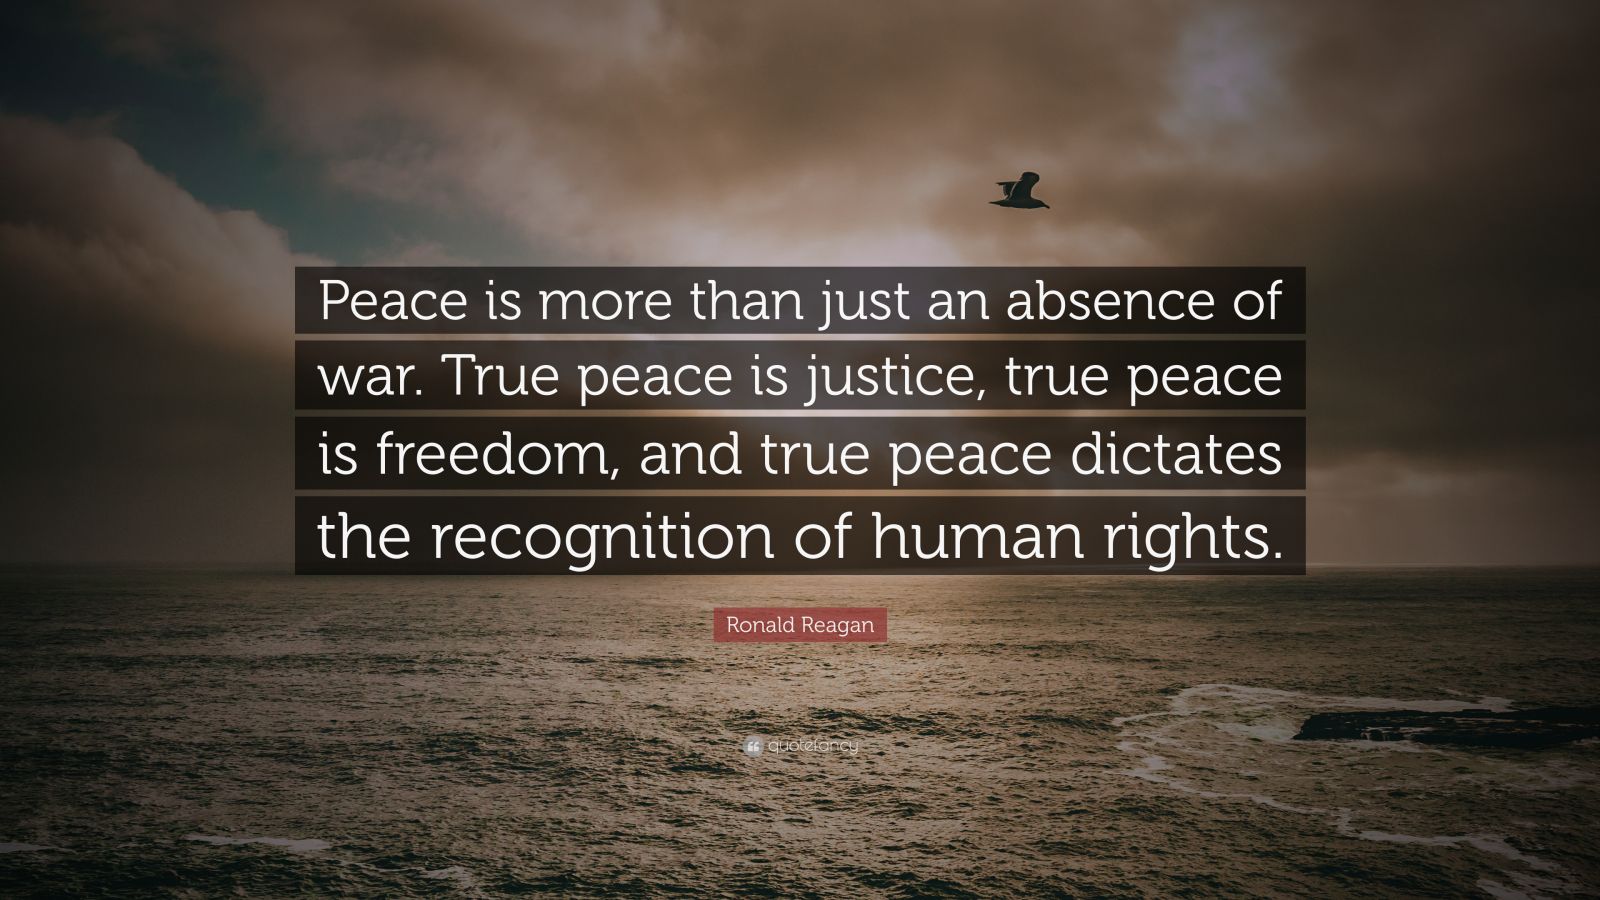 Ronald Reagan Quote: “Peace is more than just an absence of war. True ...